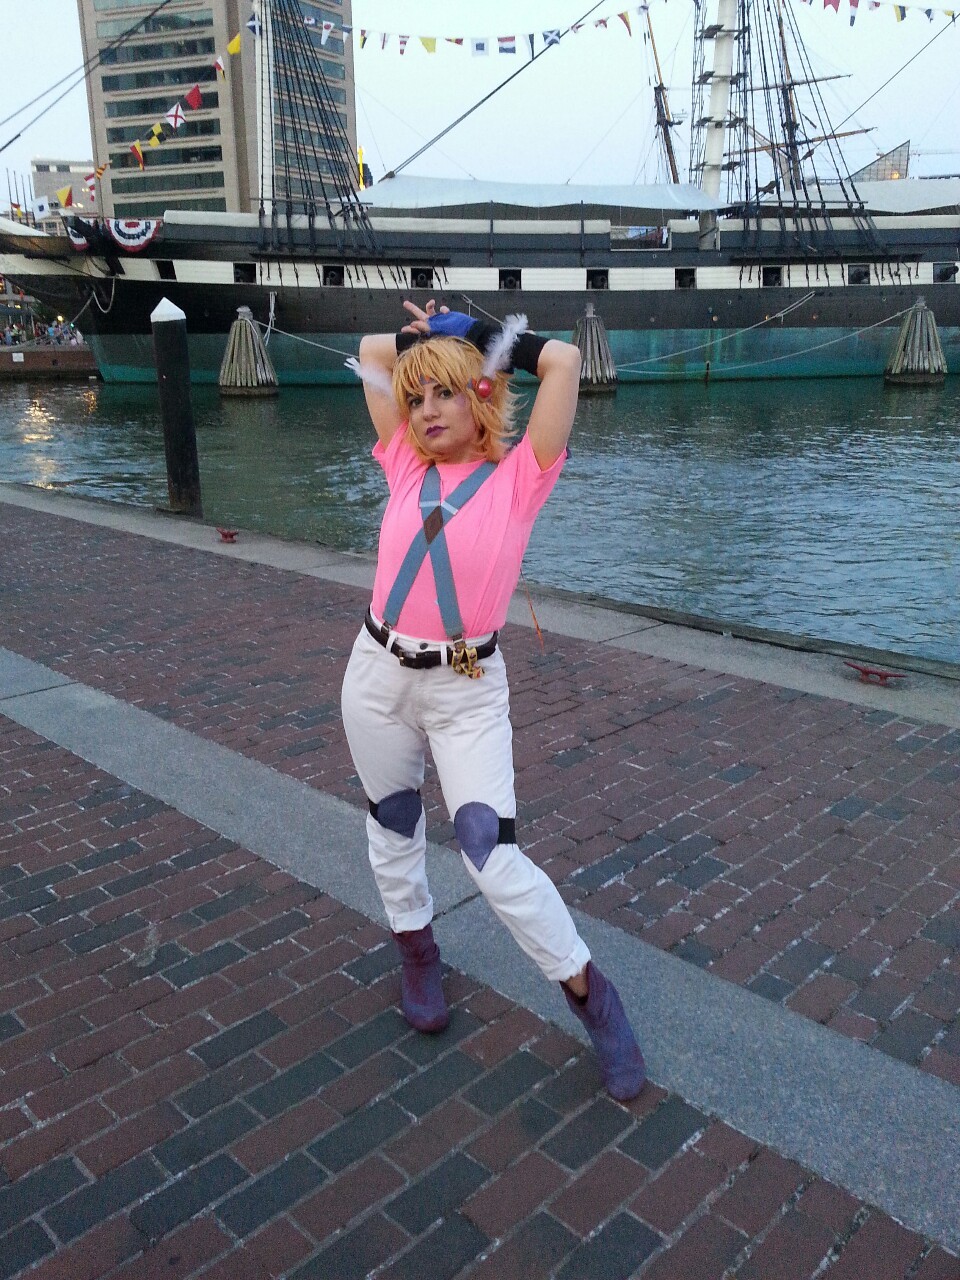 For posterity&rsquo;s sake, here&rsquo;s my Caesar Zeppeli cosplay from Friday